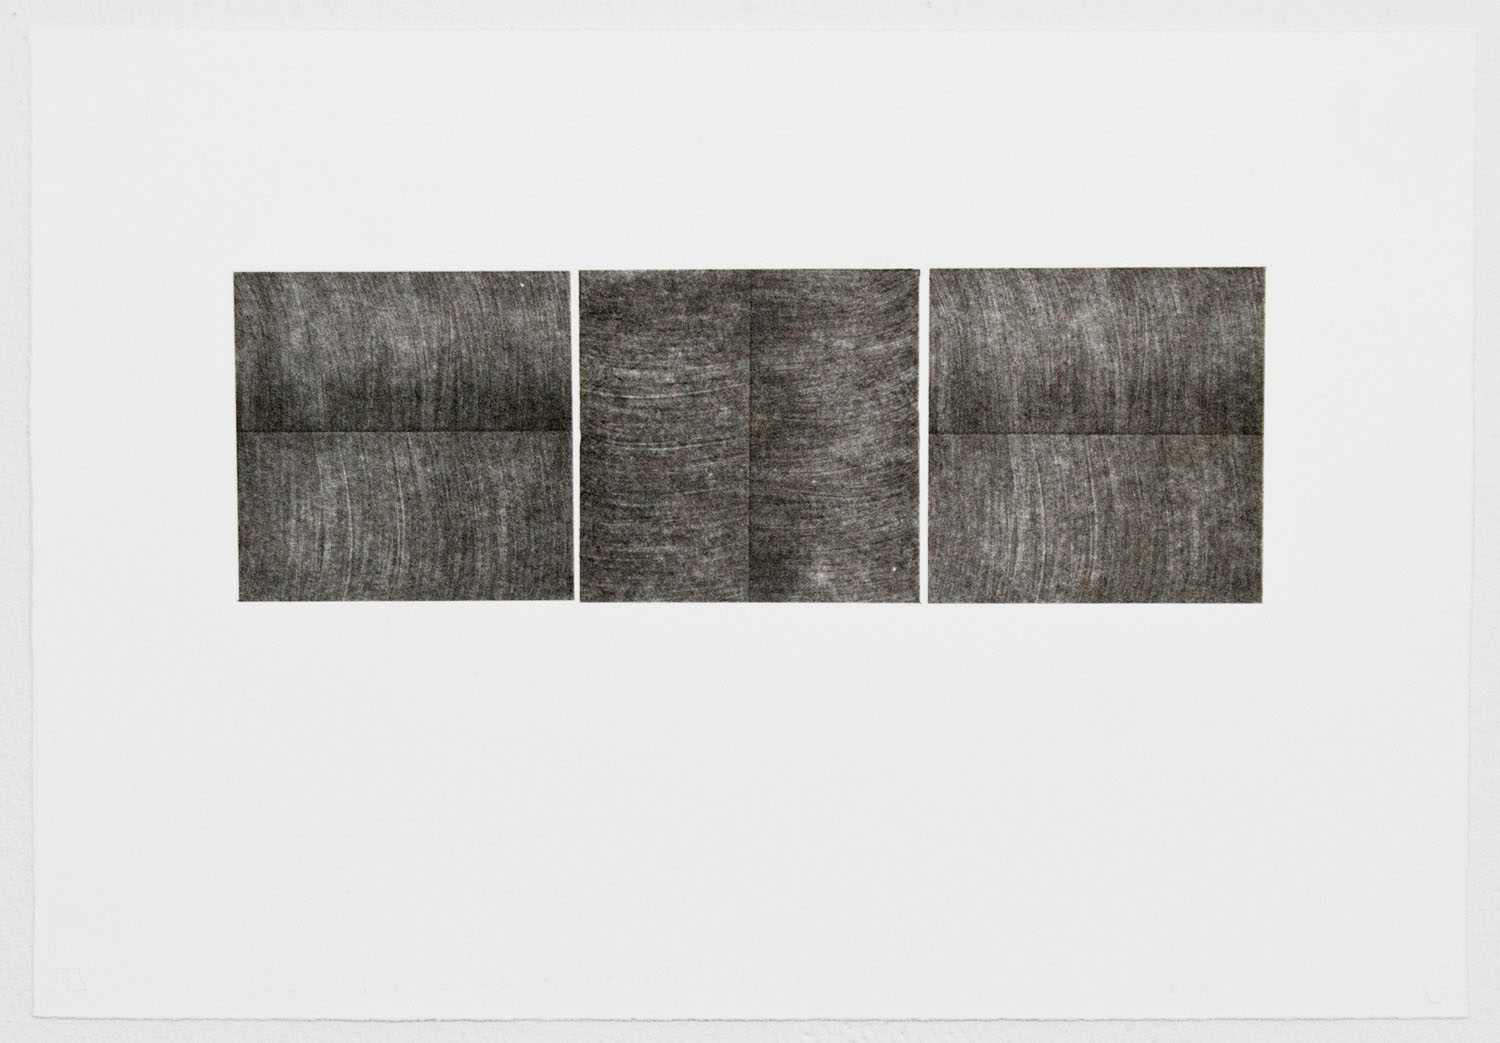   Unfolding Triptych No. 1, Edition of 15, 2015  Single-color lithograph with chine colle, 10.94” x 15.81” (paper size)  Collaborating Printer: Valpuri Remling @ Tamarind Institute 